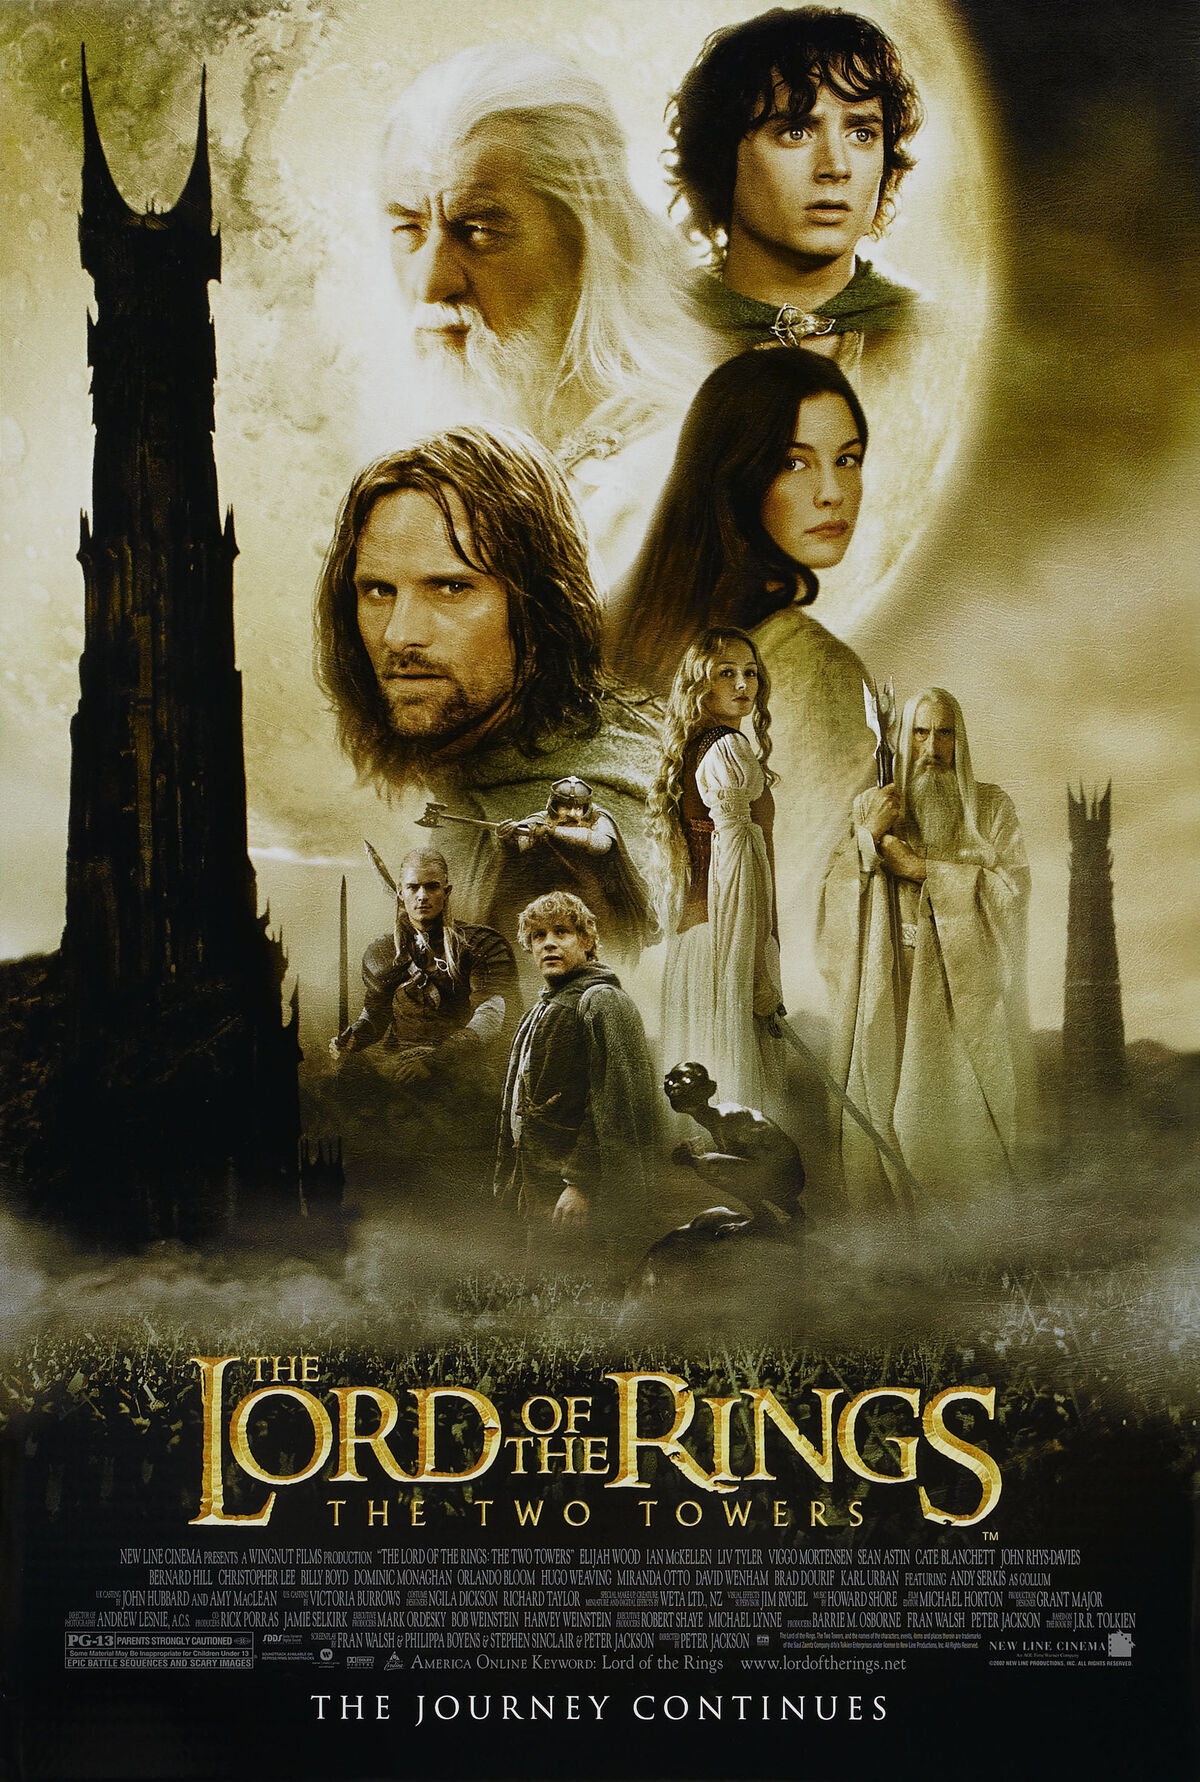 Category:Minor characters (The Lord of the Rings), The One Wiki to Rule  Them All